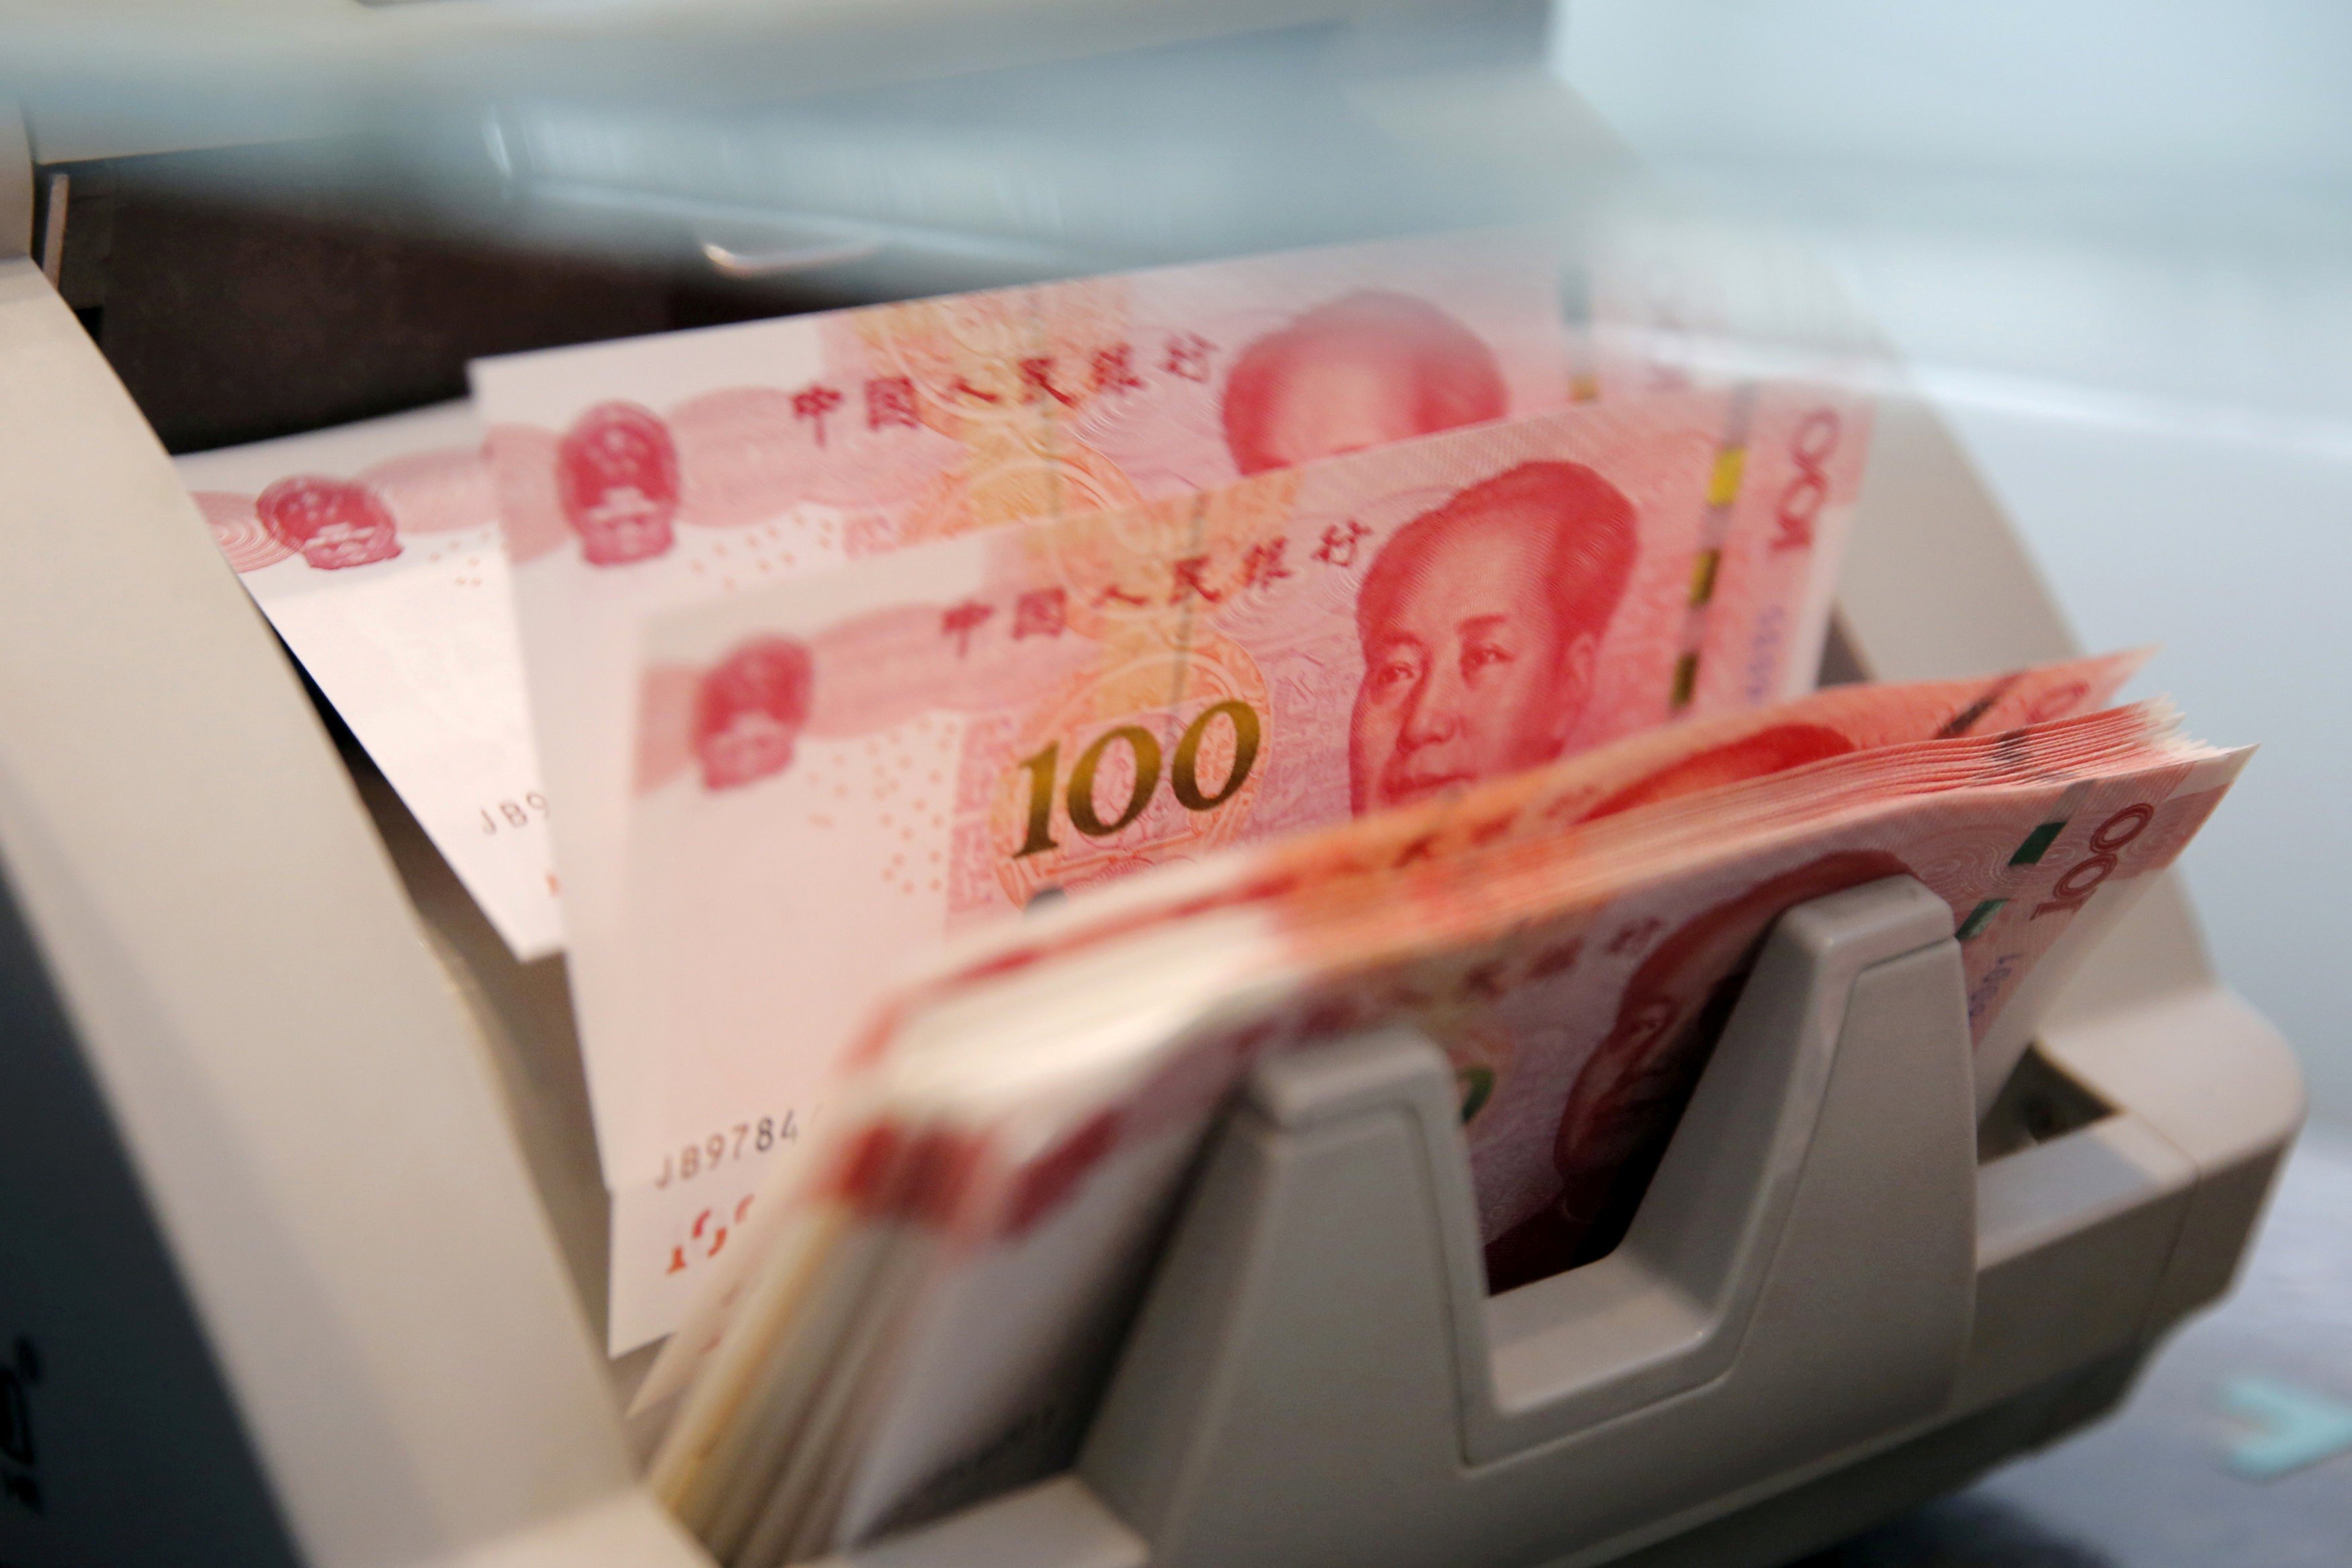 Net new national aggregate financing – a broad measure of credit and liquidity in the world’s second largest economy – slumped to 1.01 trillion yuan (US$144 billion) in July. Photo: Reuters